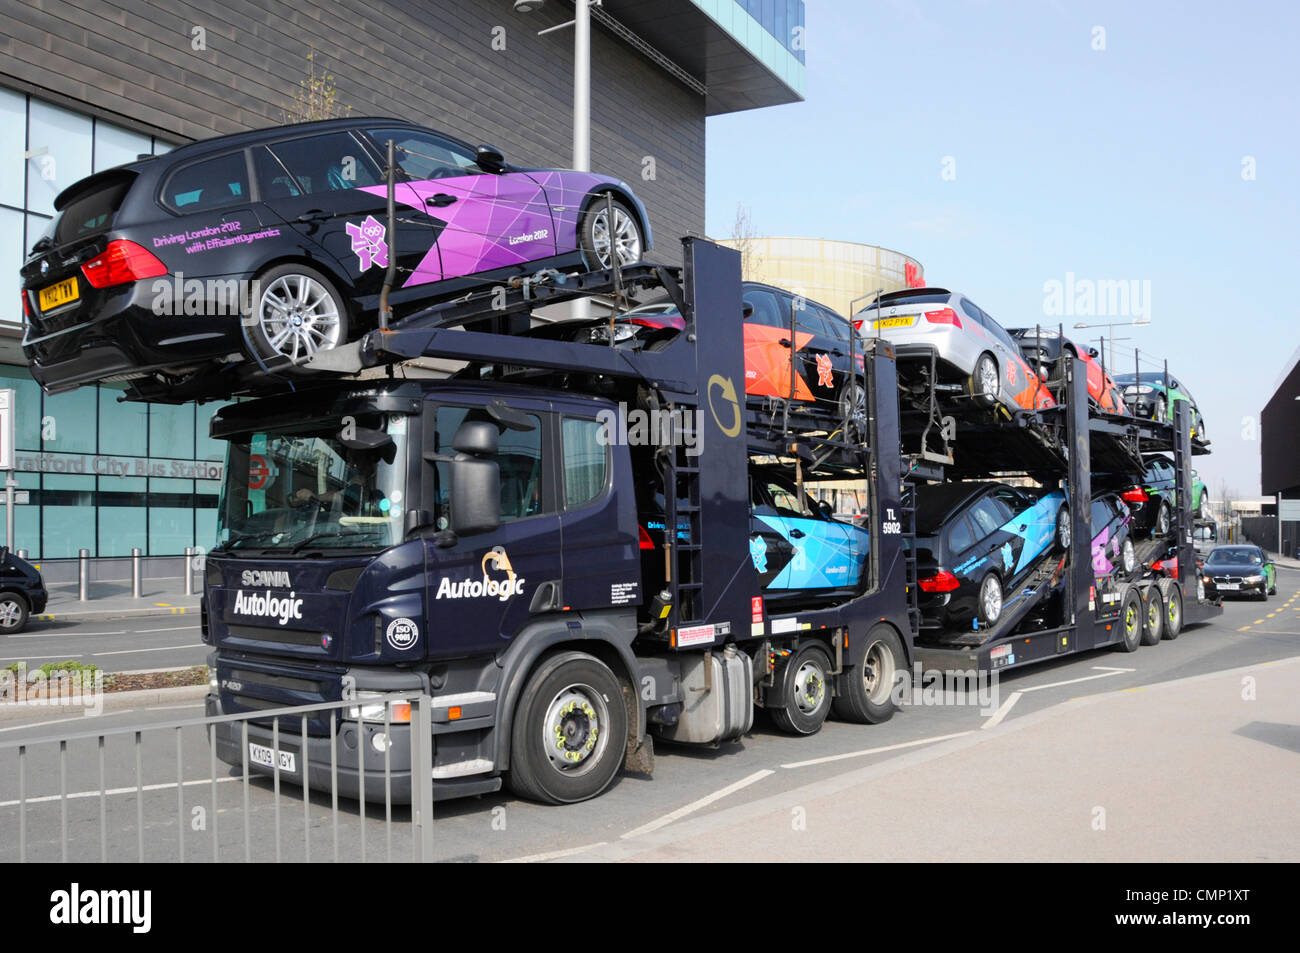 Autologic Car Transporter BMW cars painted in 2012 Olympic Paralympic games colours for use by officials & others at Stratford East London England UK Stock Photo